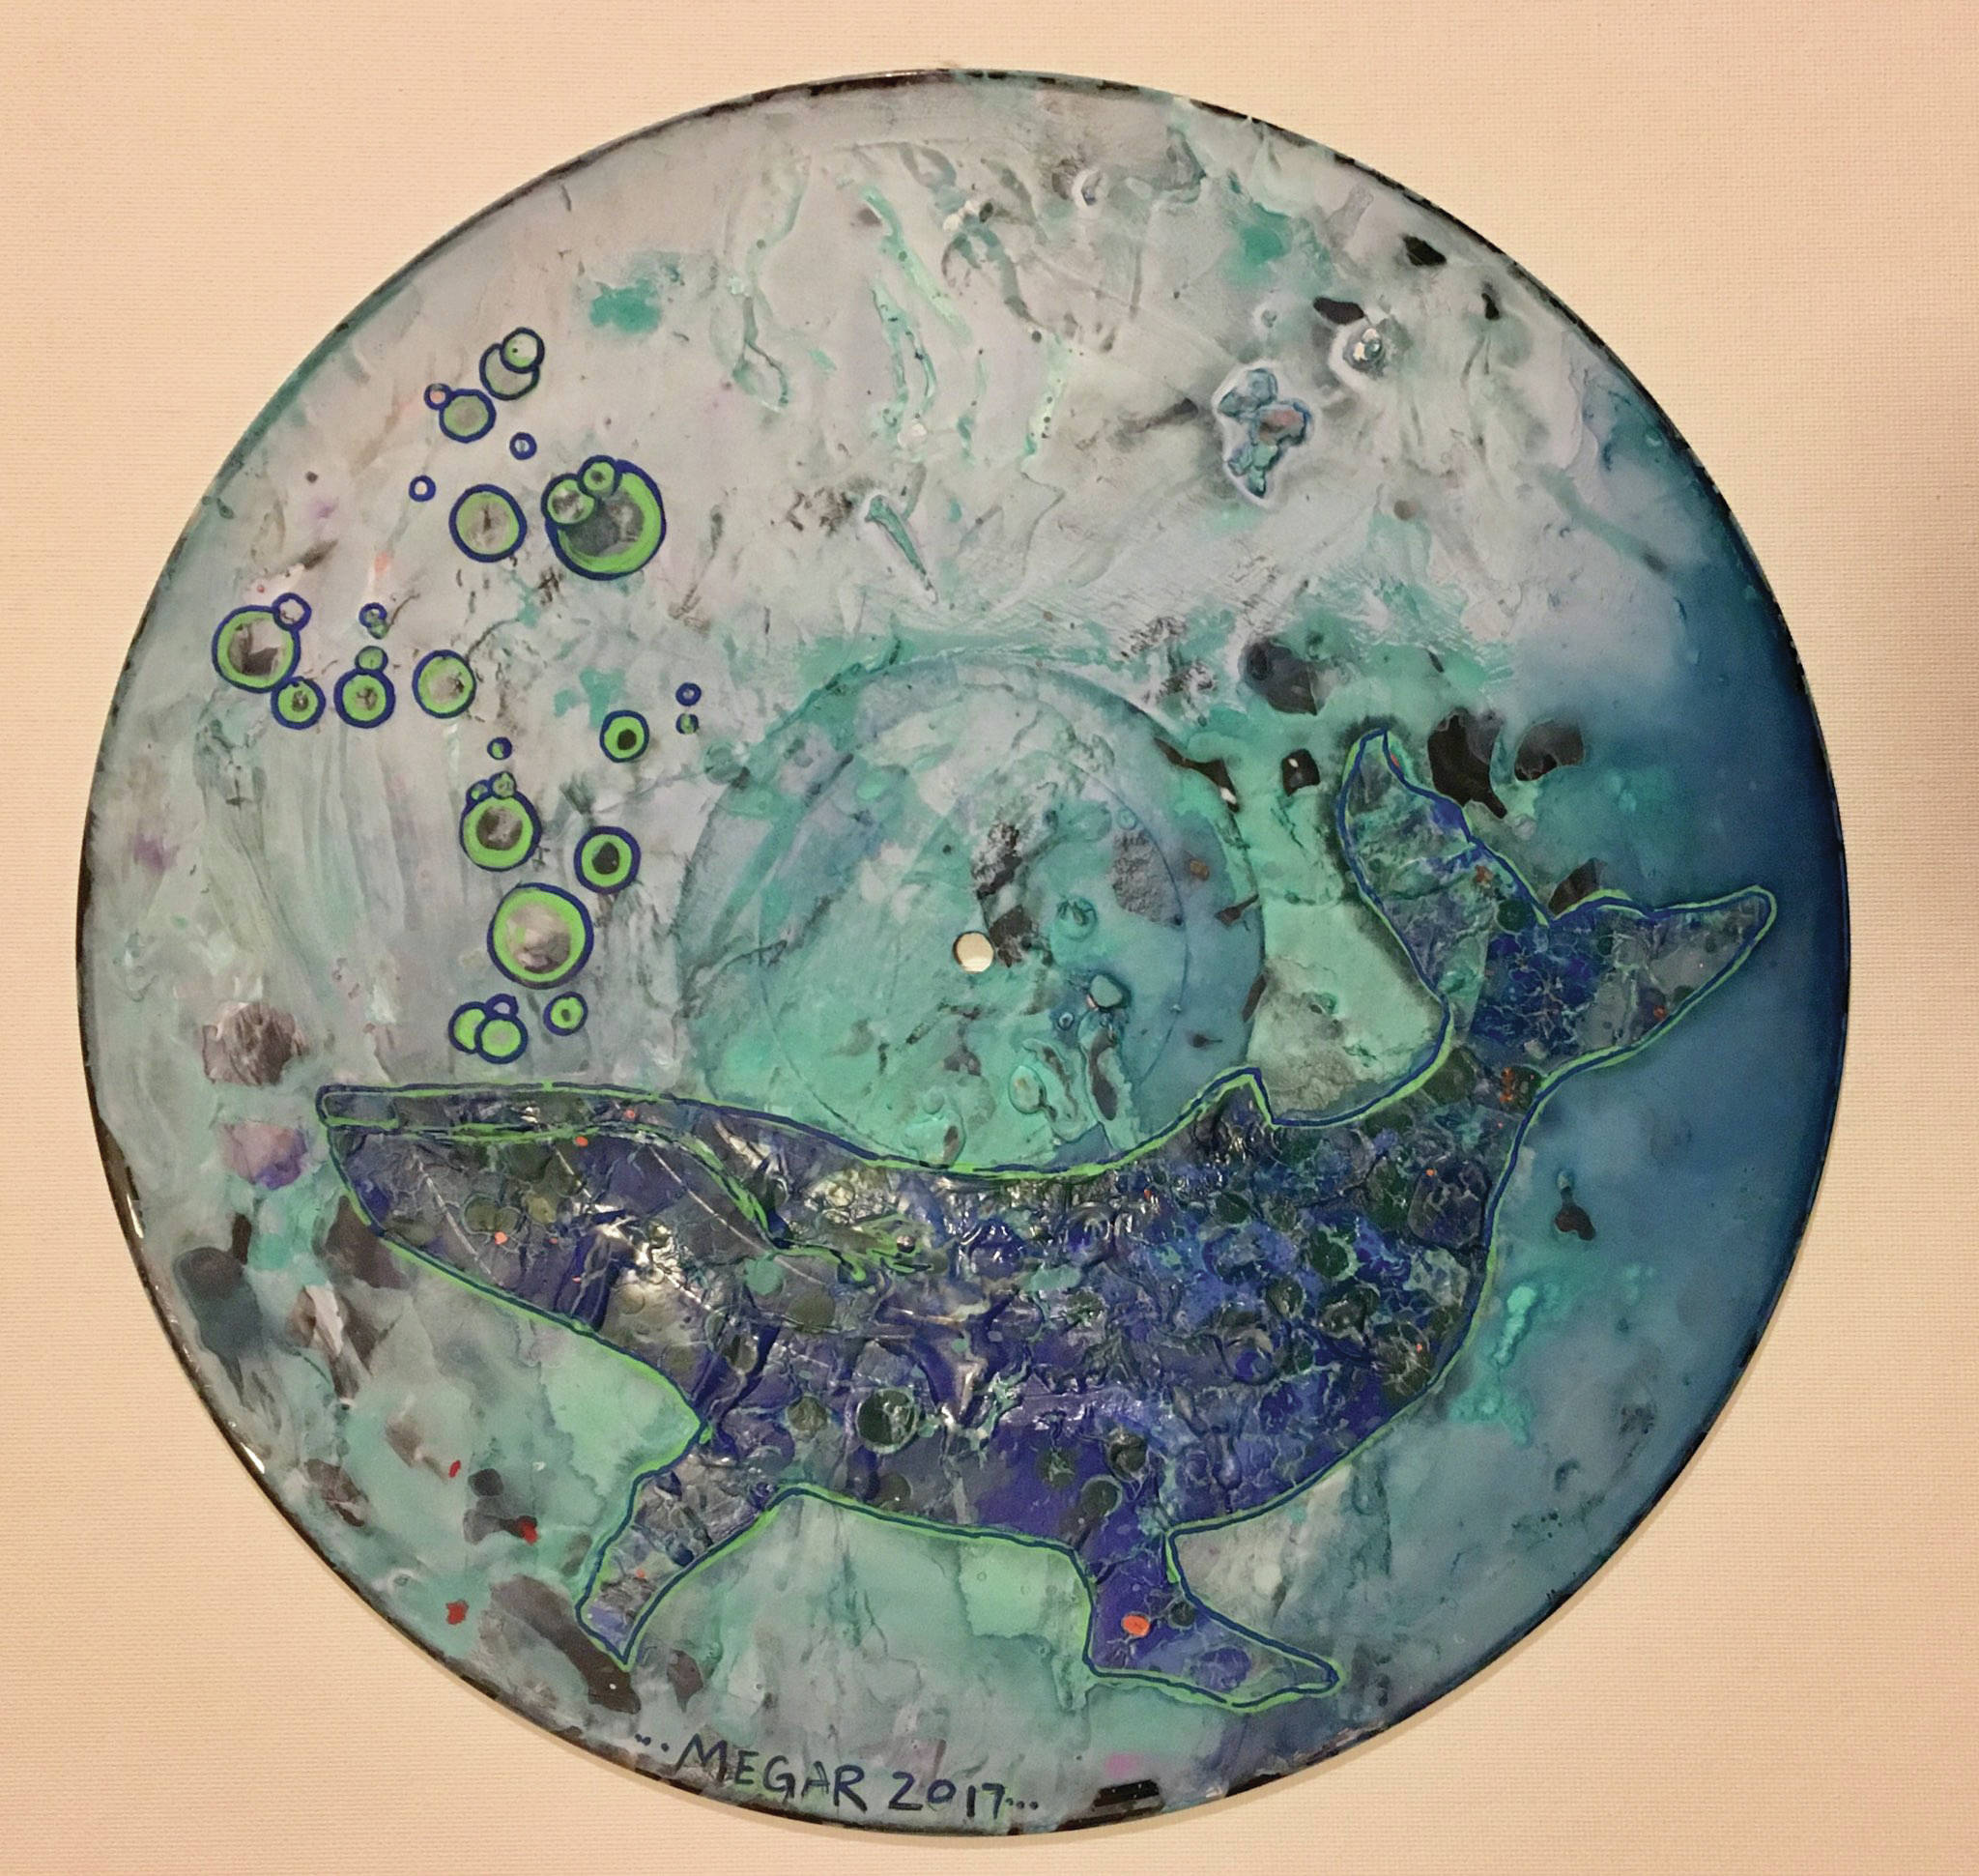 Megan Frost’s painting on a vinyl record is part of her show opening Friday, Nov. 6, 2020, at The Plantman in Homer, Alaska. (Photo courtesy of The Plantman)